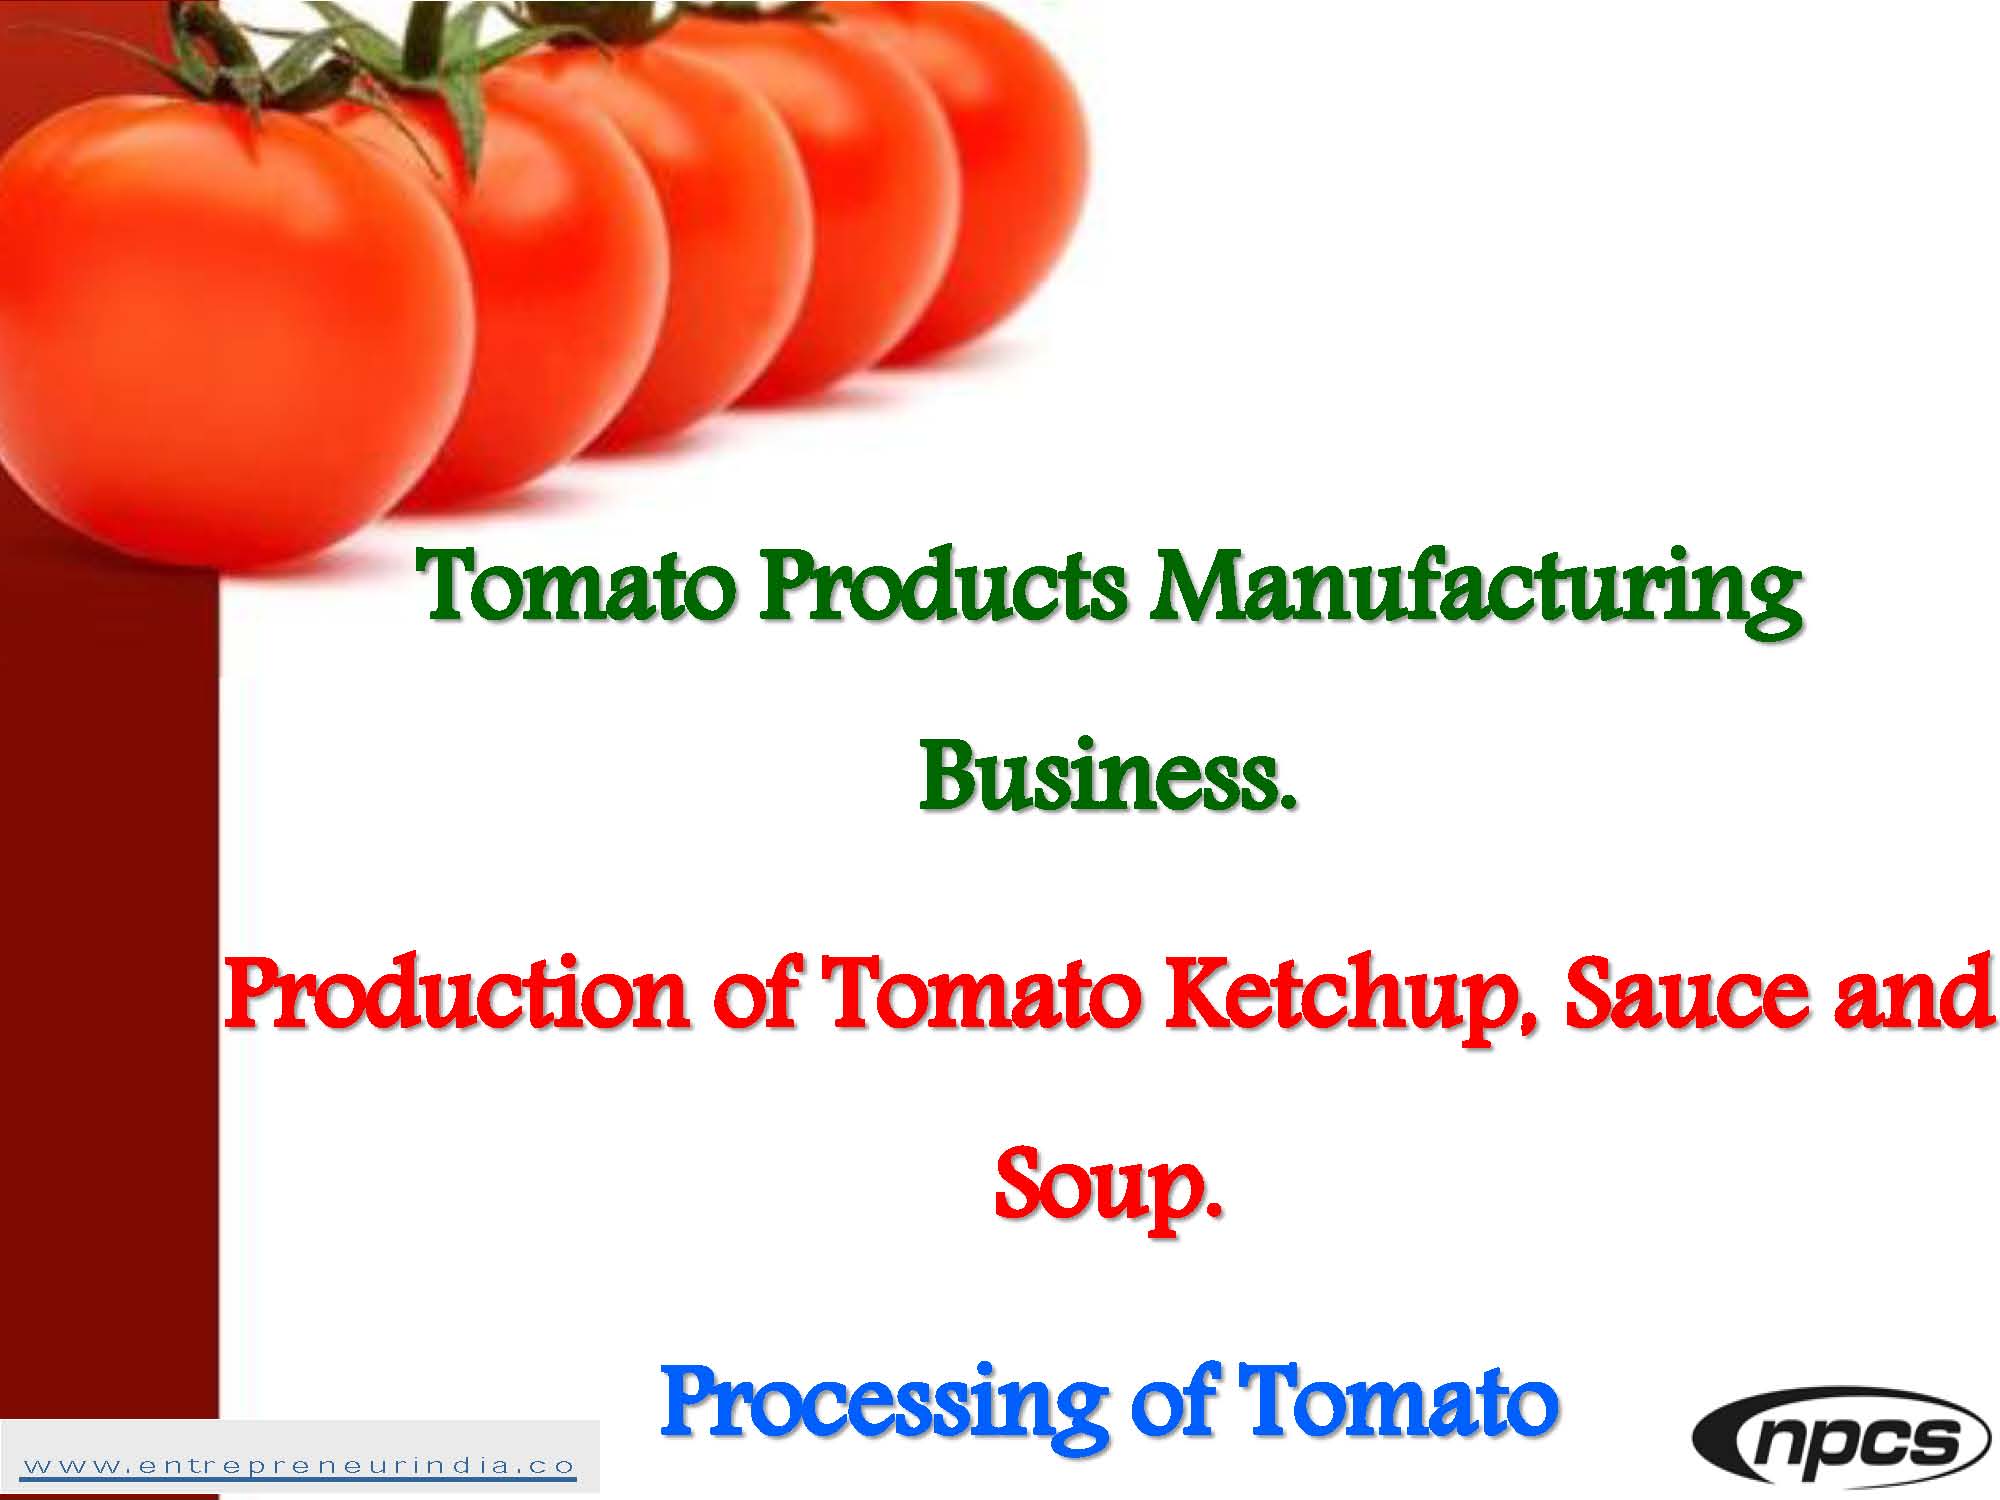 Tomato Products Manufacturing Business